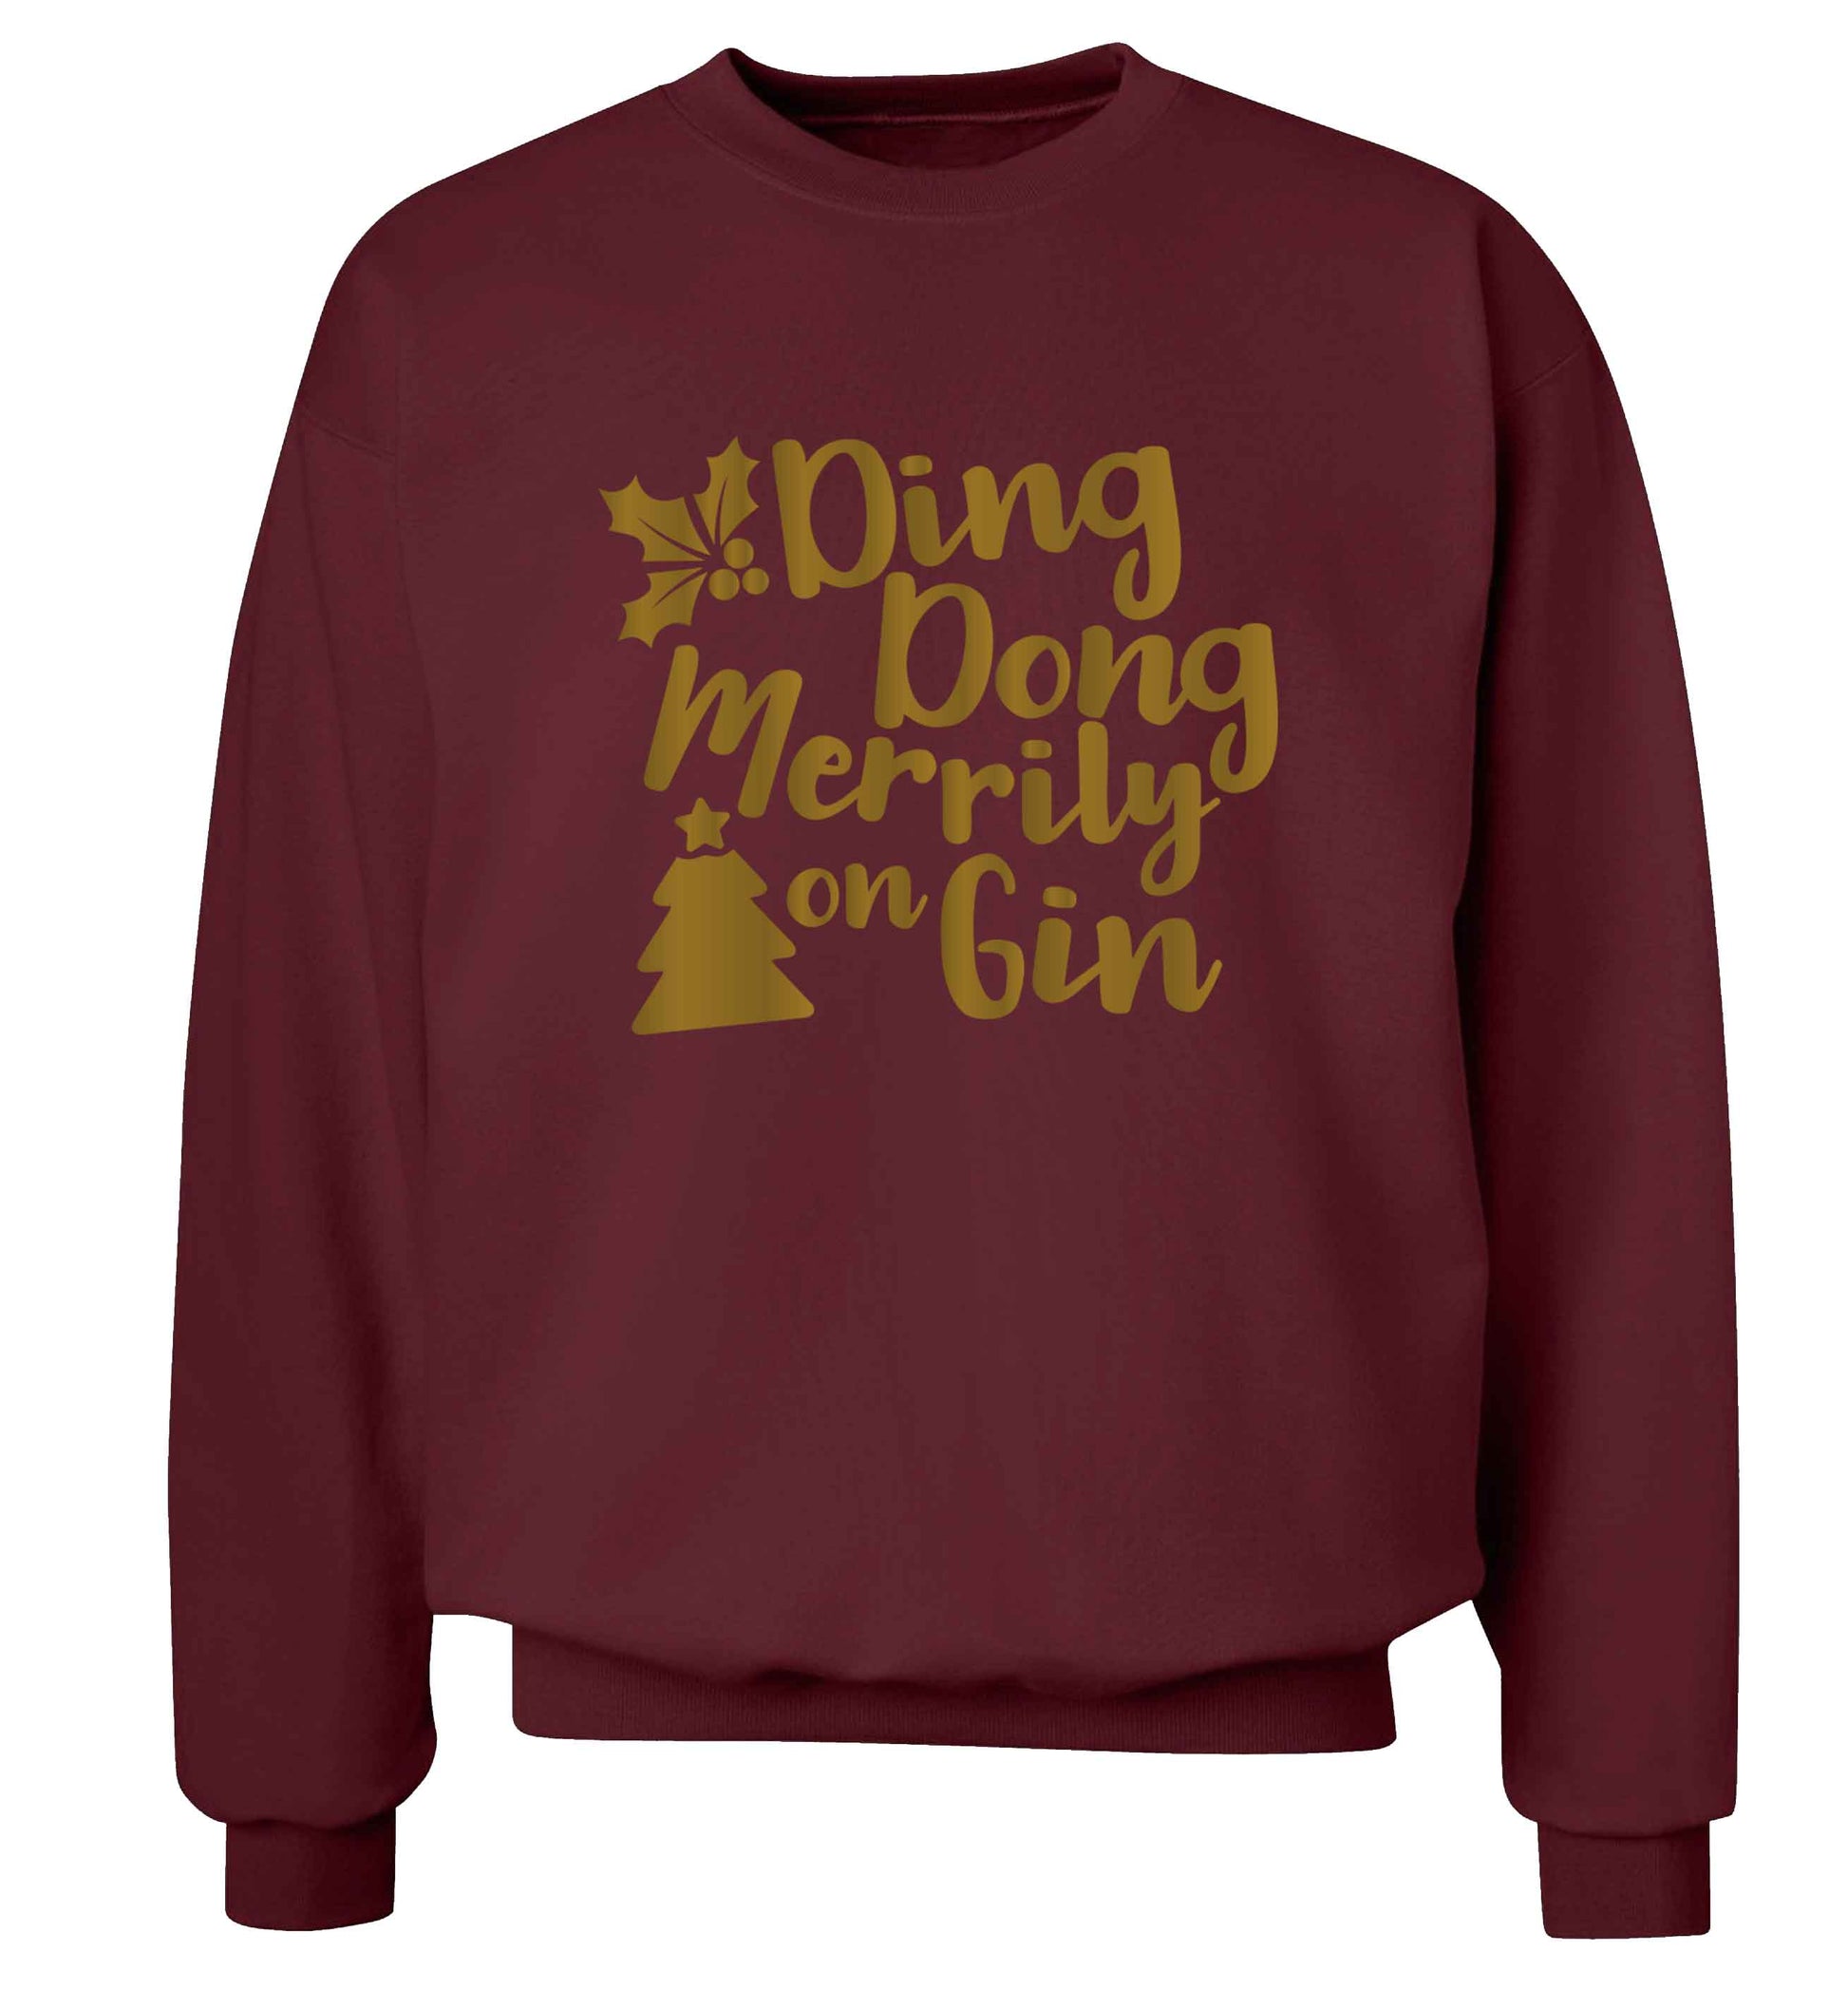 Ding dong merrily on gin Adult's unisex maroon Sweater 2XL